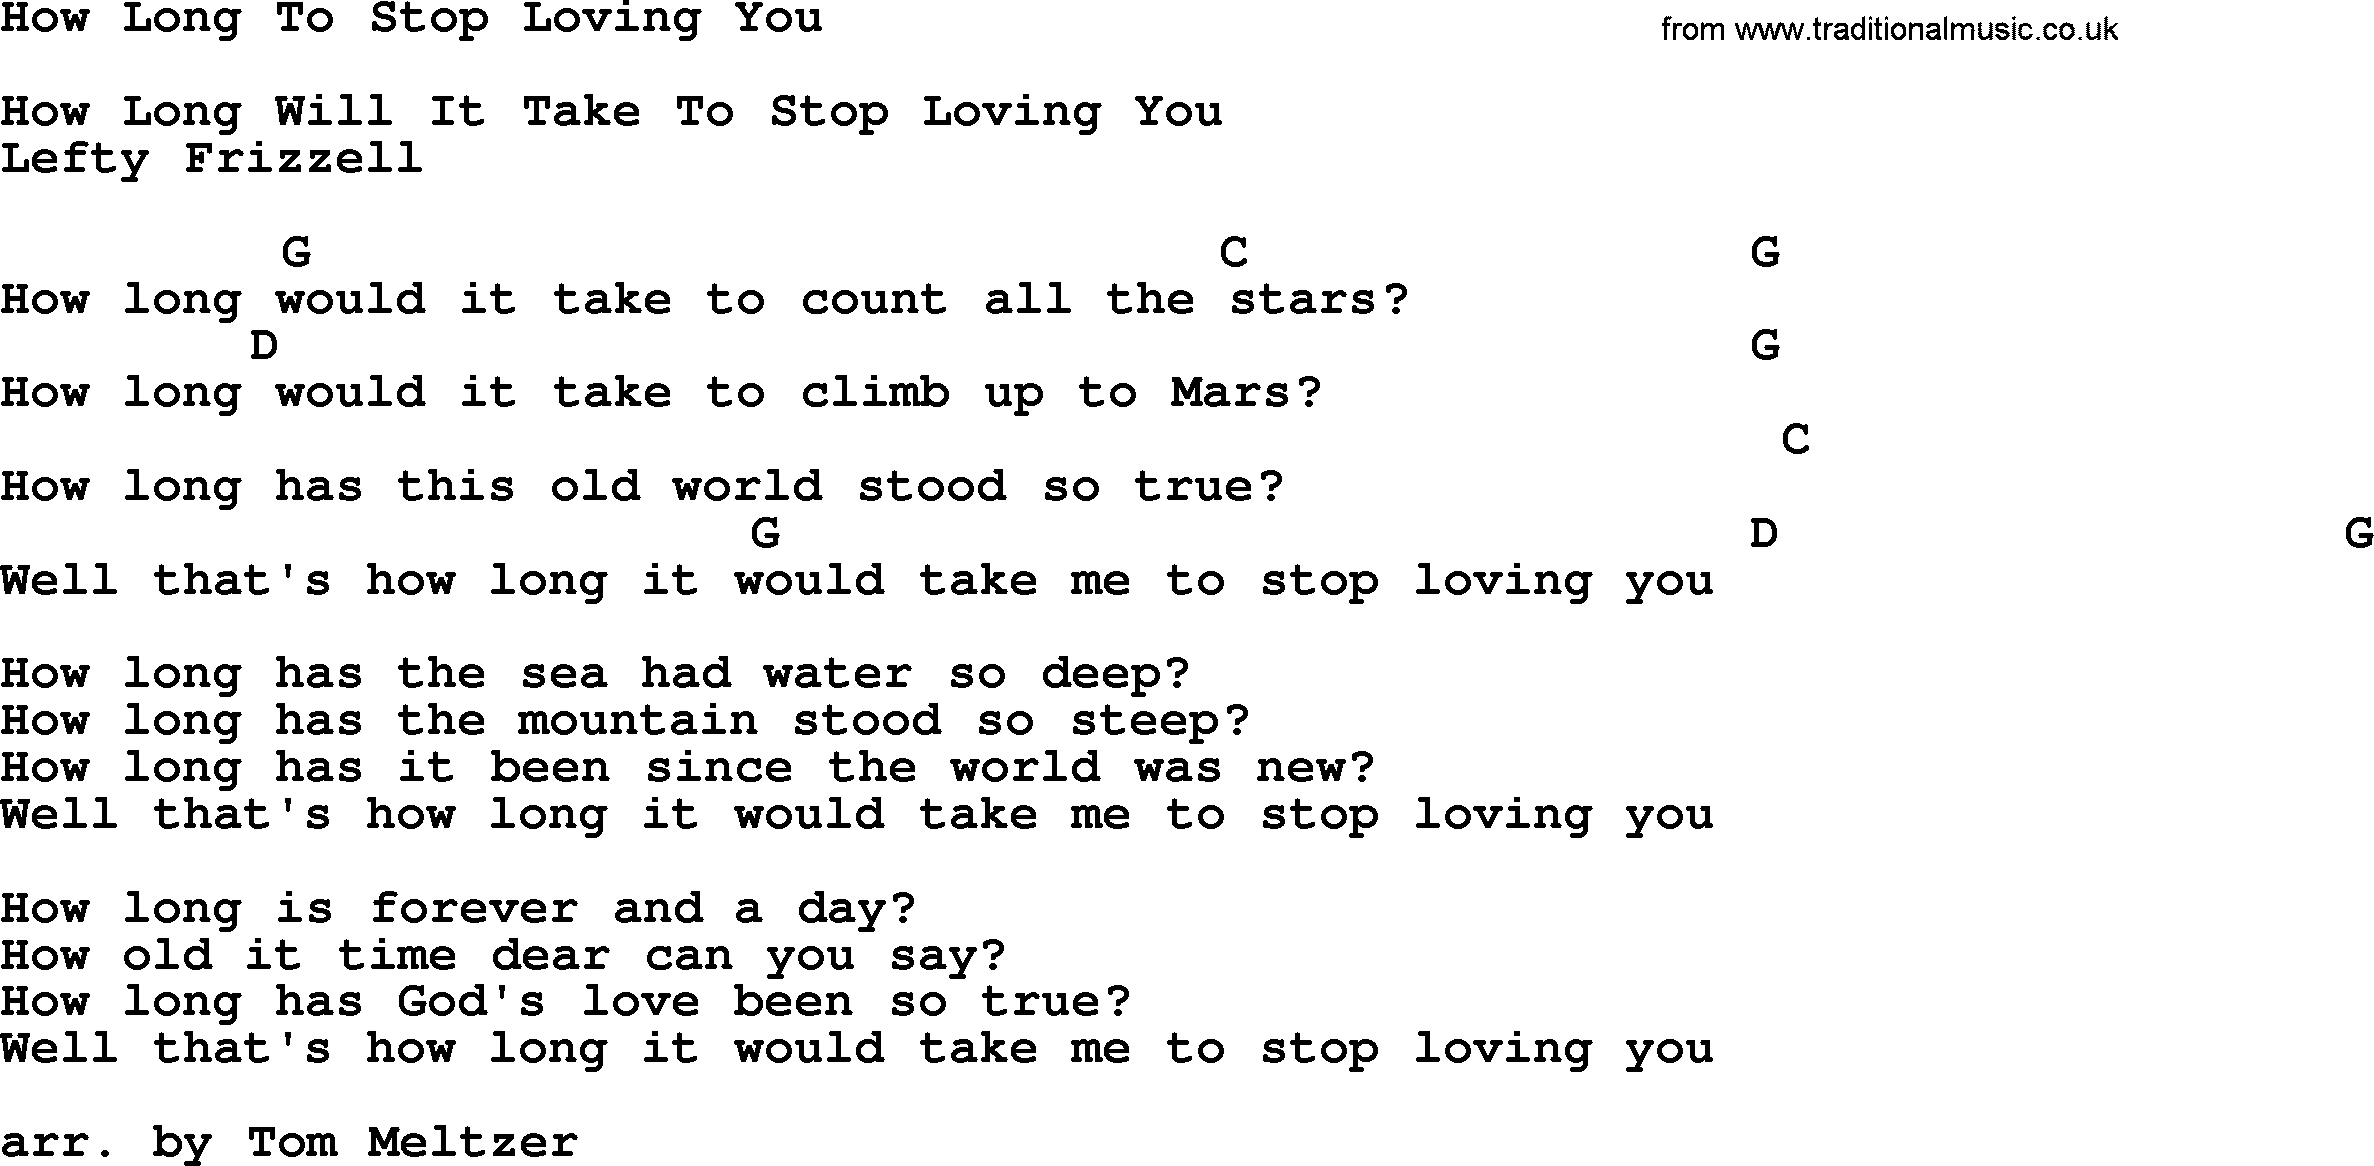 Bluegrass song: How Long To Stop Loving You, lyrics and chords